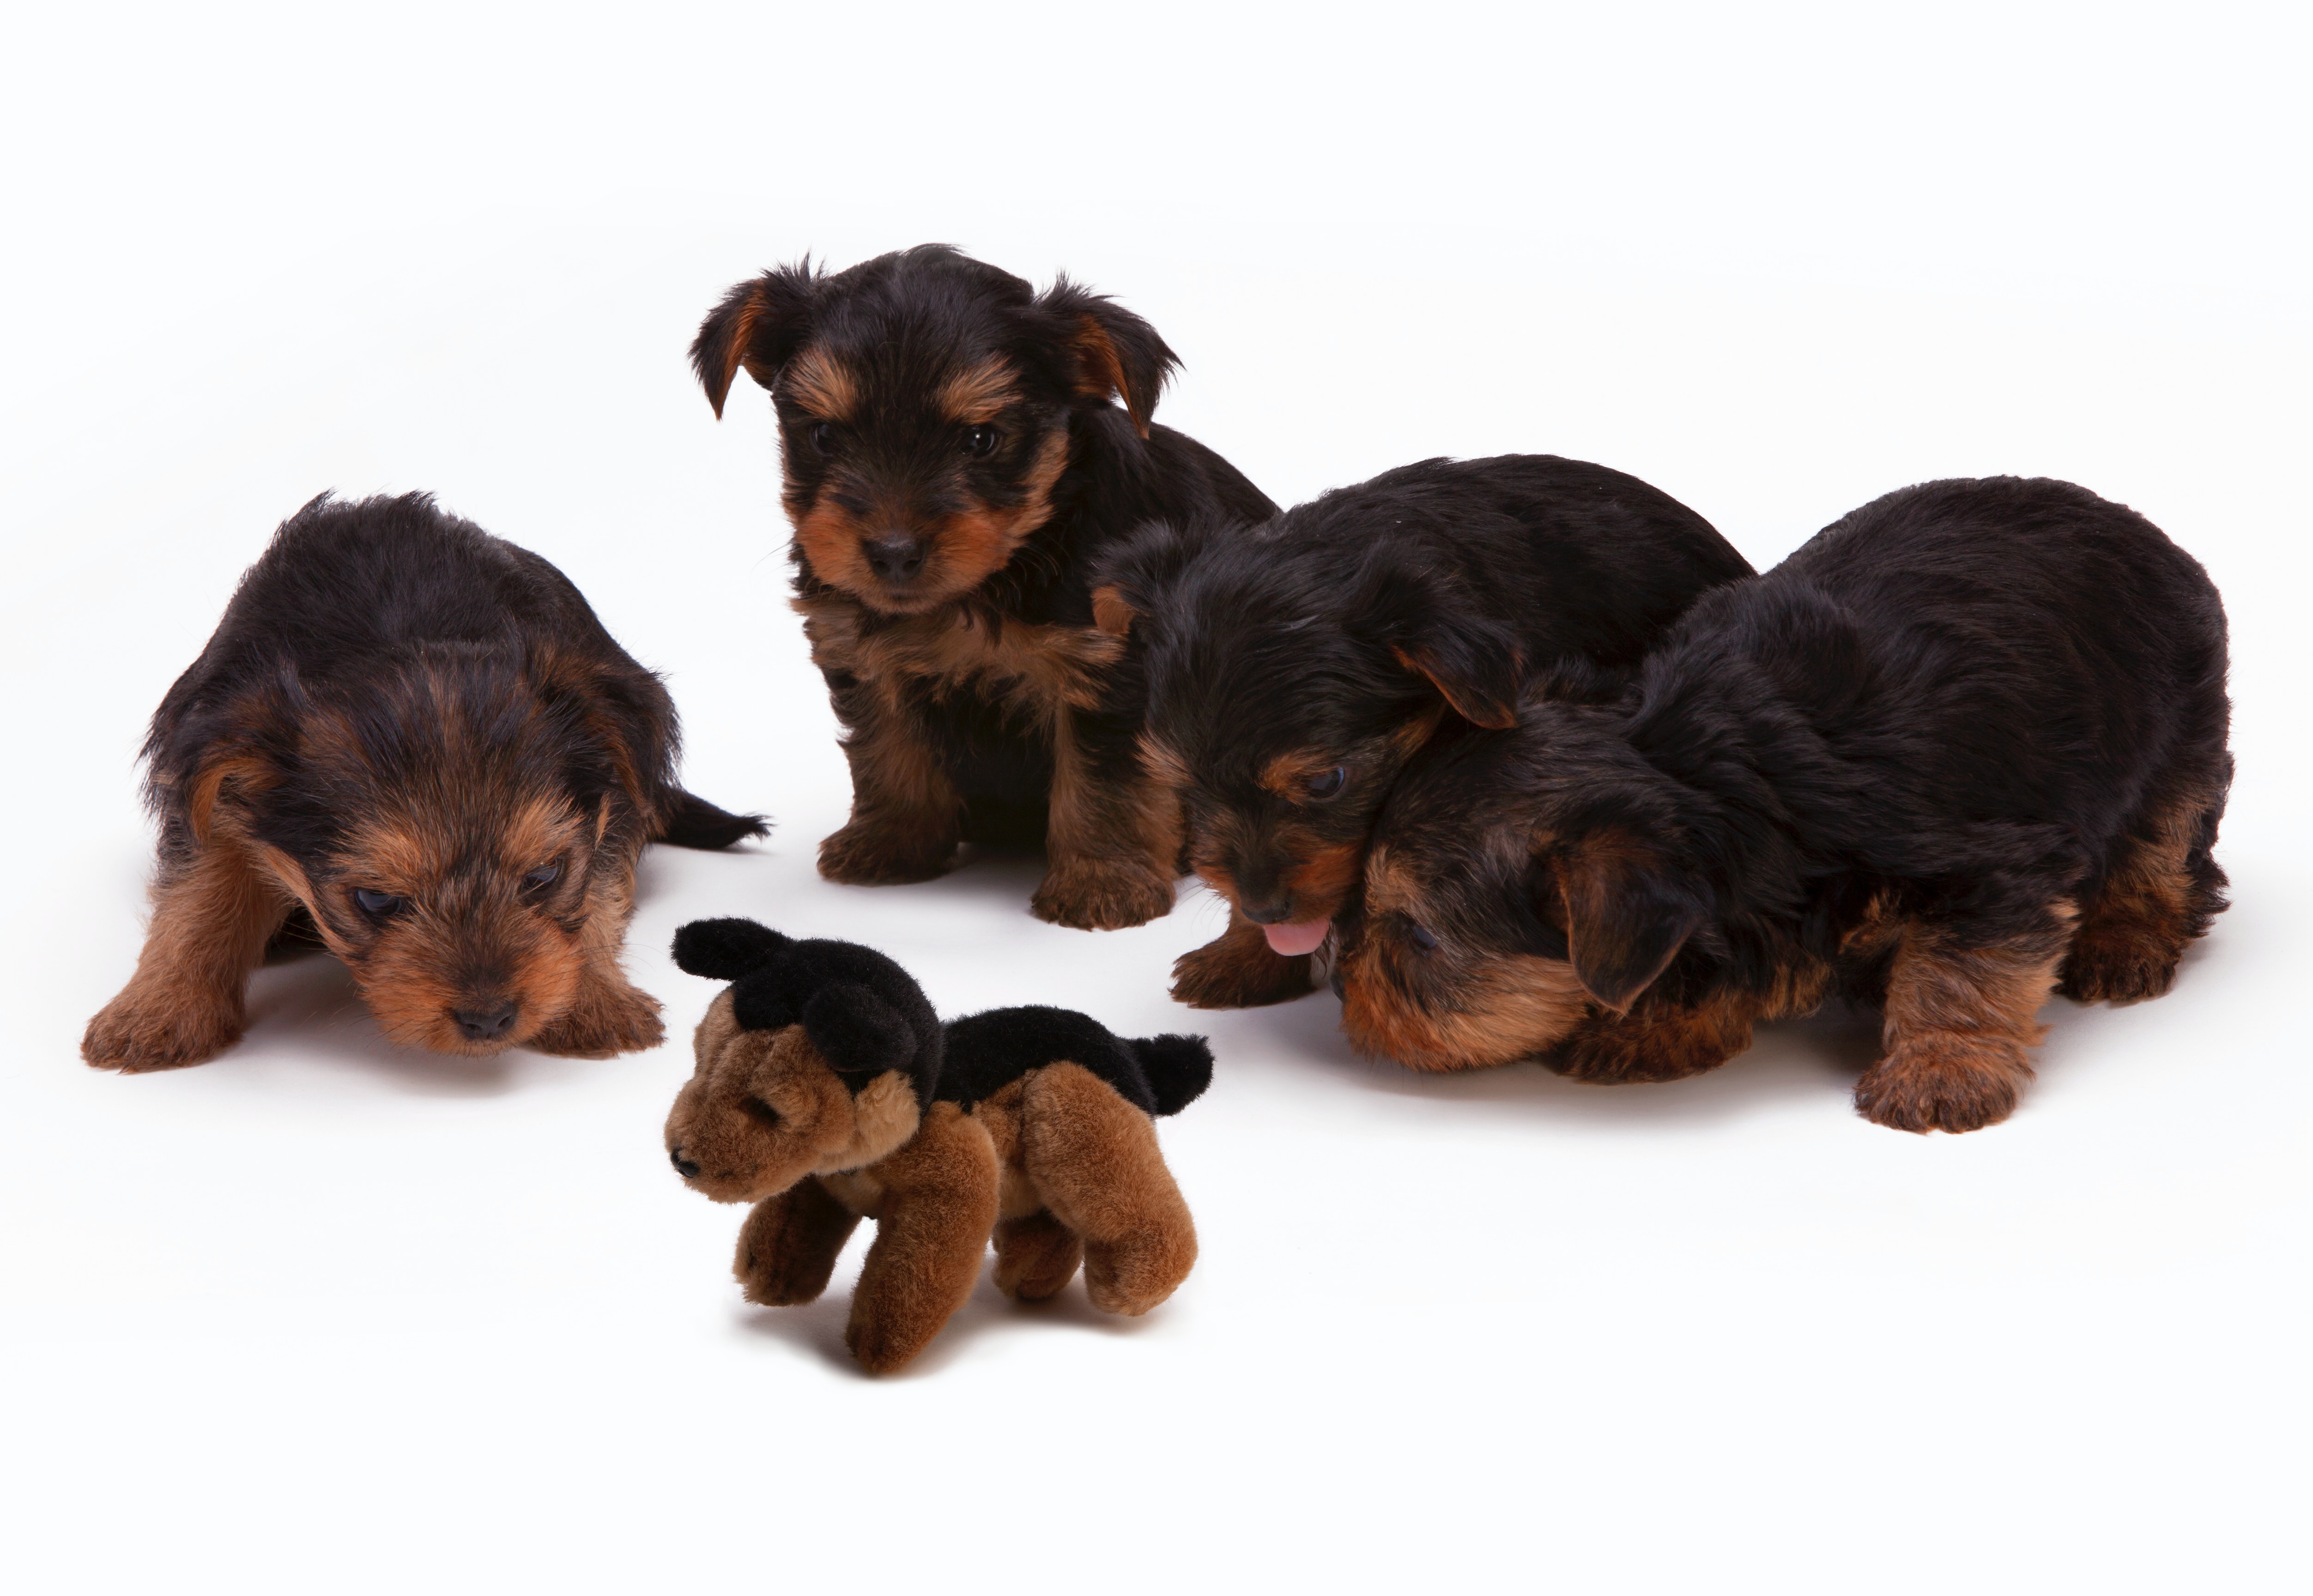 Four Yorkie puppies playfully surround a stuffed dog, their tiny tails wagging with excitement.